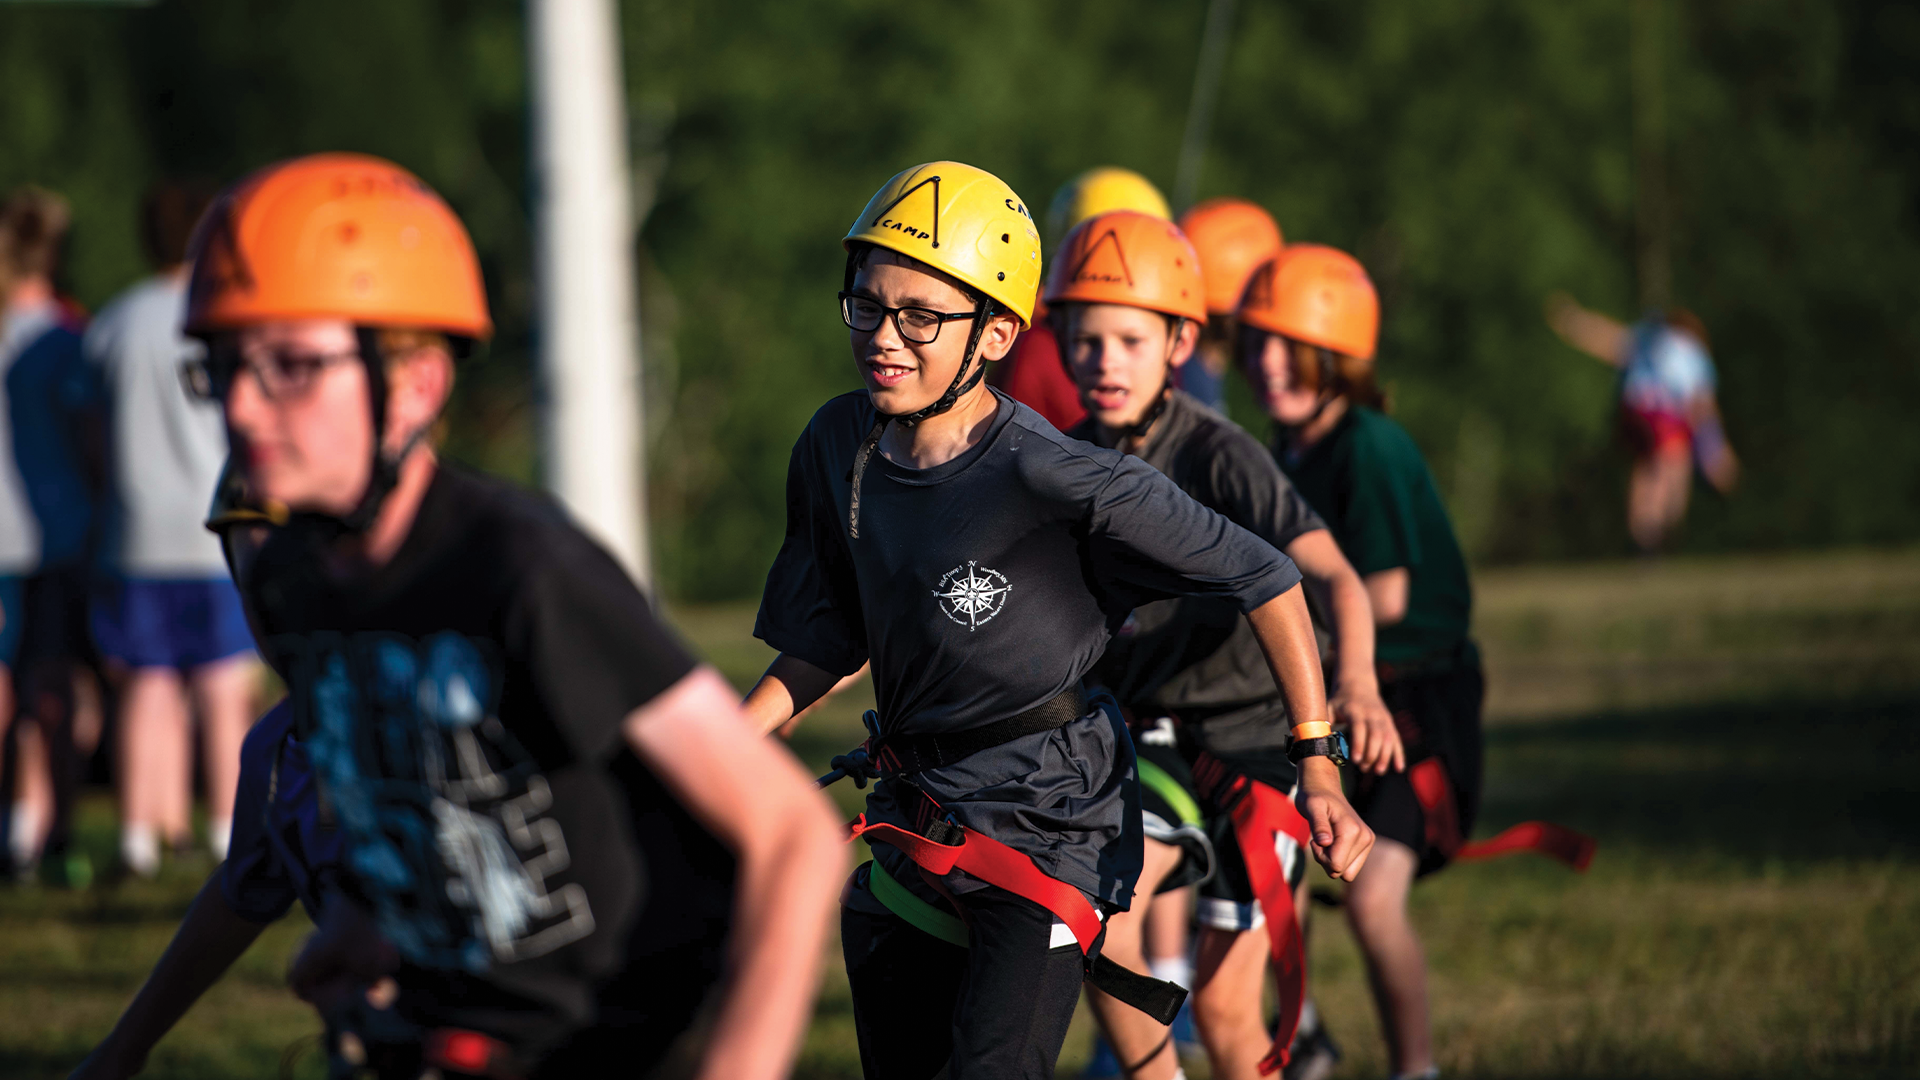 A group of middle-school aged Scouts wearing climbing gear, hooked into a rope and running toward the camera. In the background, a Scout who is hooked into the same rope is beginning to float off of the ground.